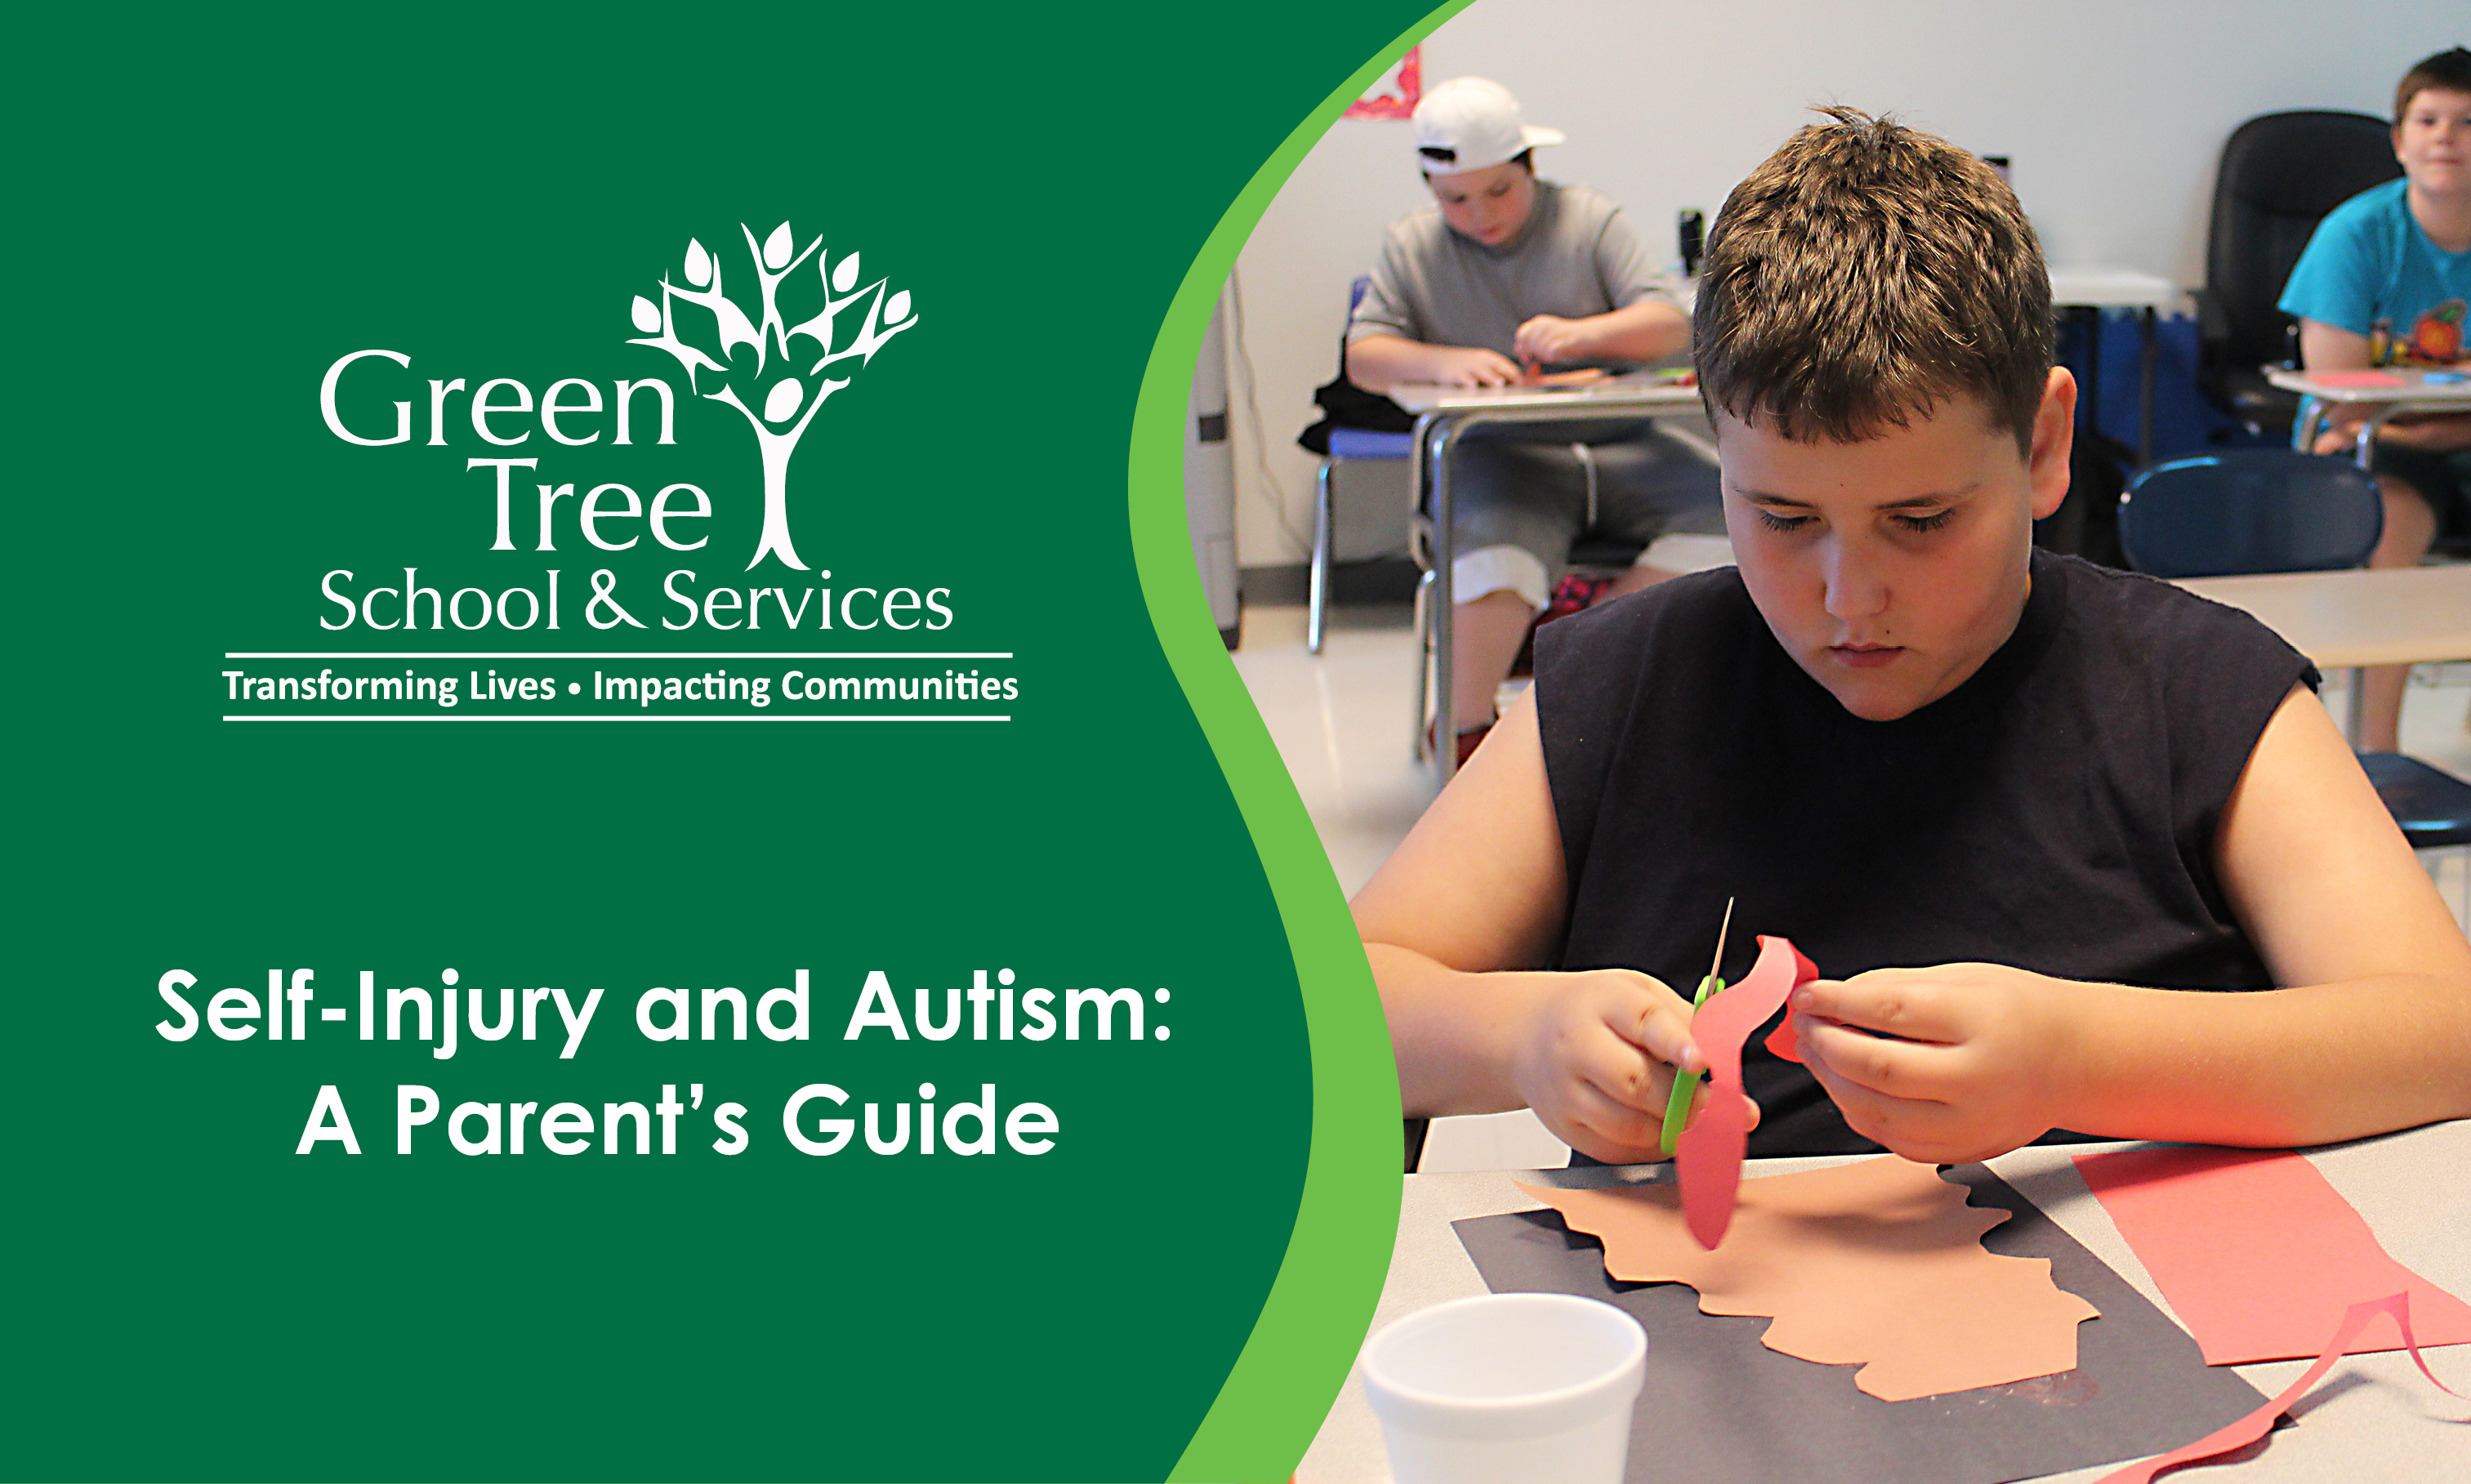 Self-Injury and Autism: A Parent’s Guide